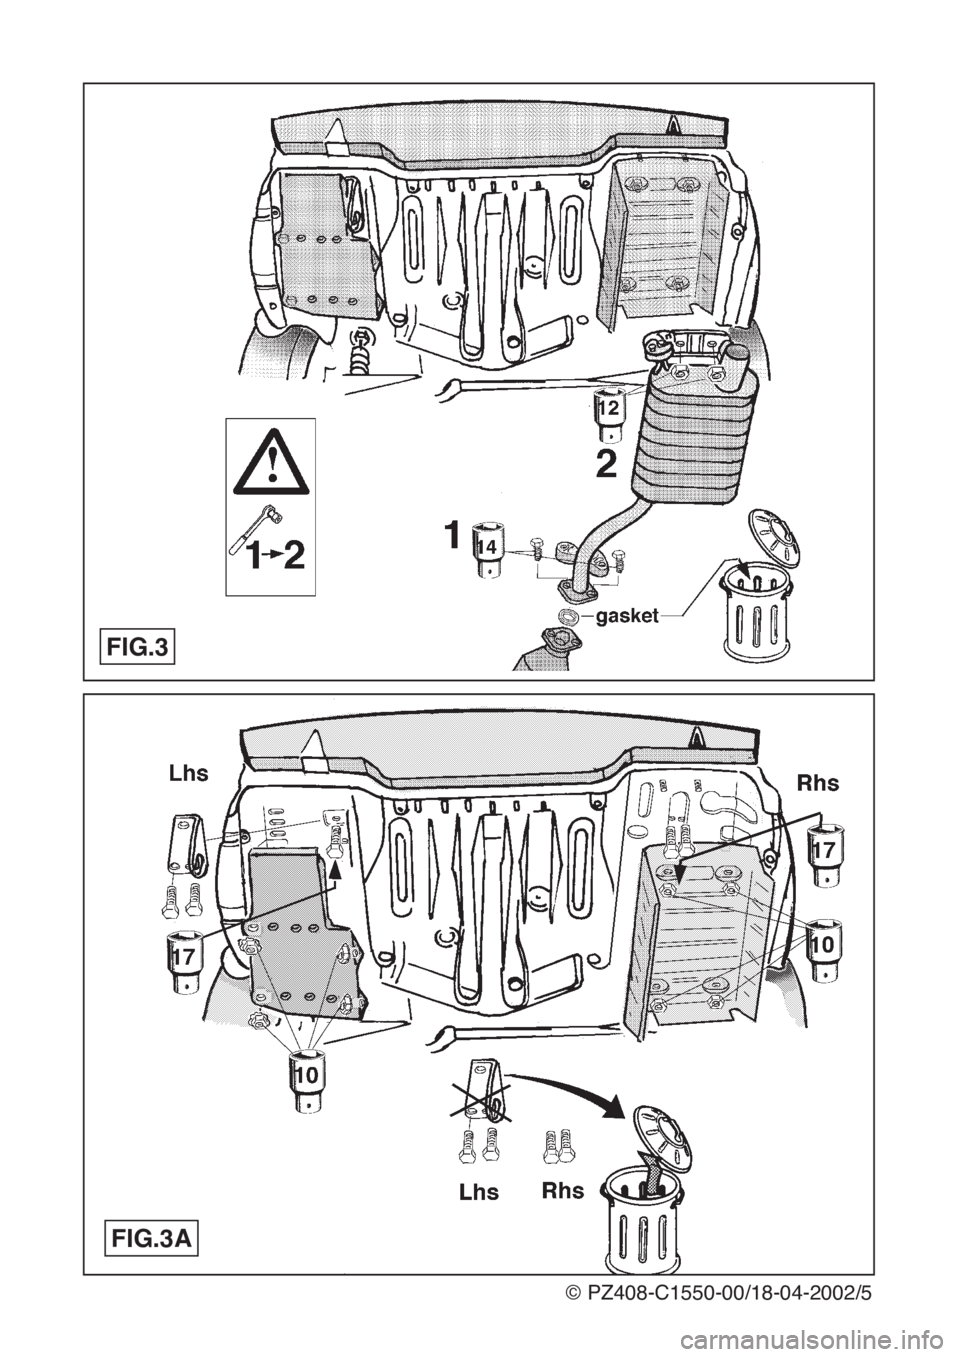 Lexus IS200 1999  Towing hitch © PZ408-C1550-00/18-04-2002/5
FIG.3
FIG.3A 